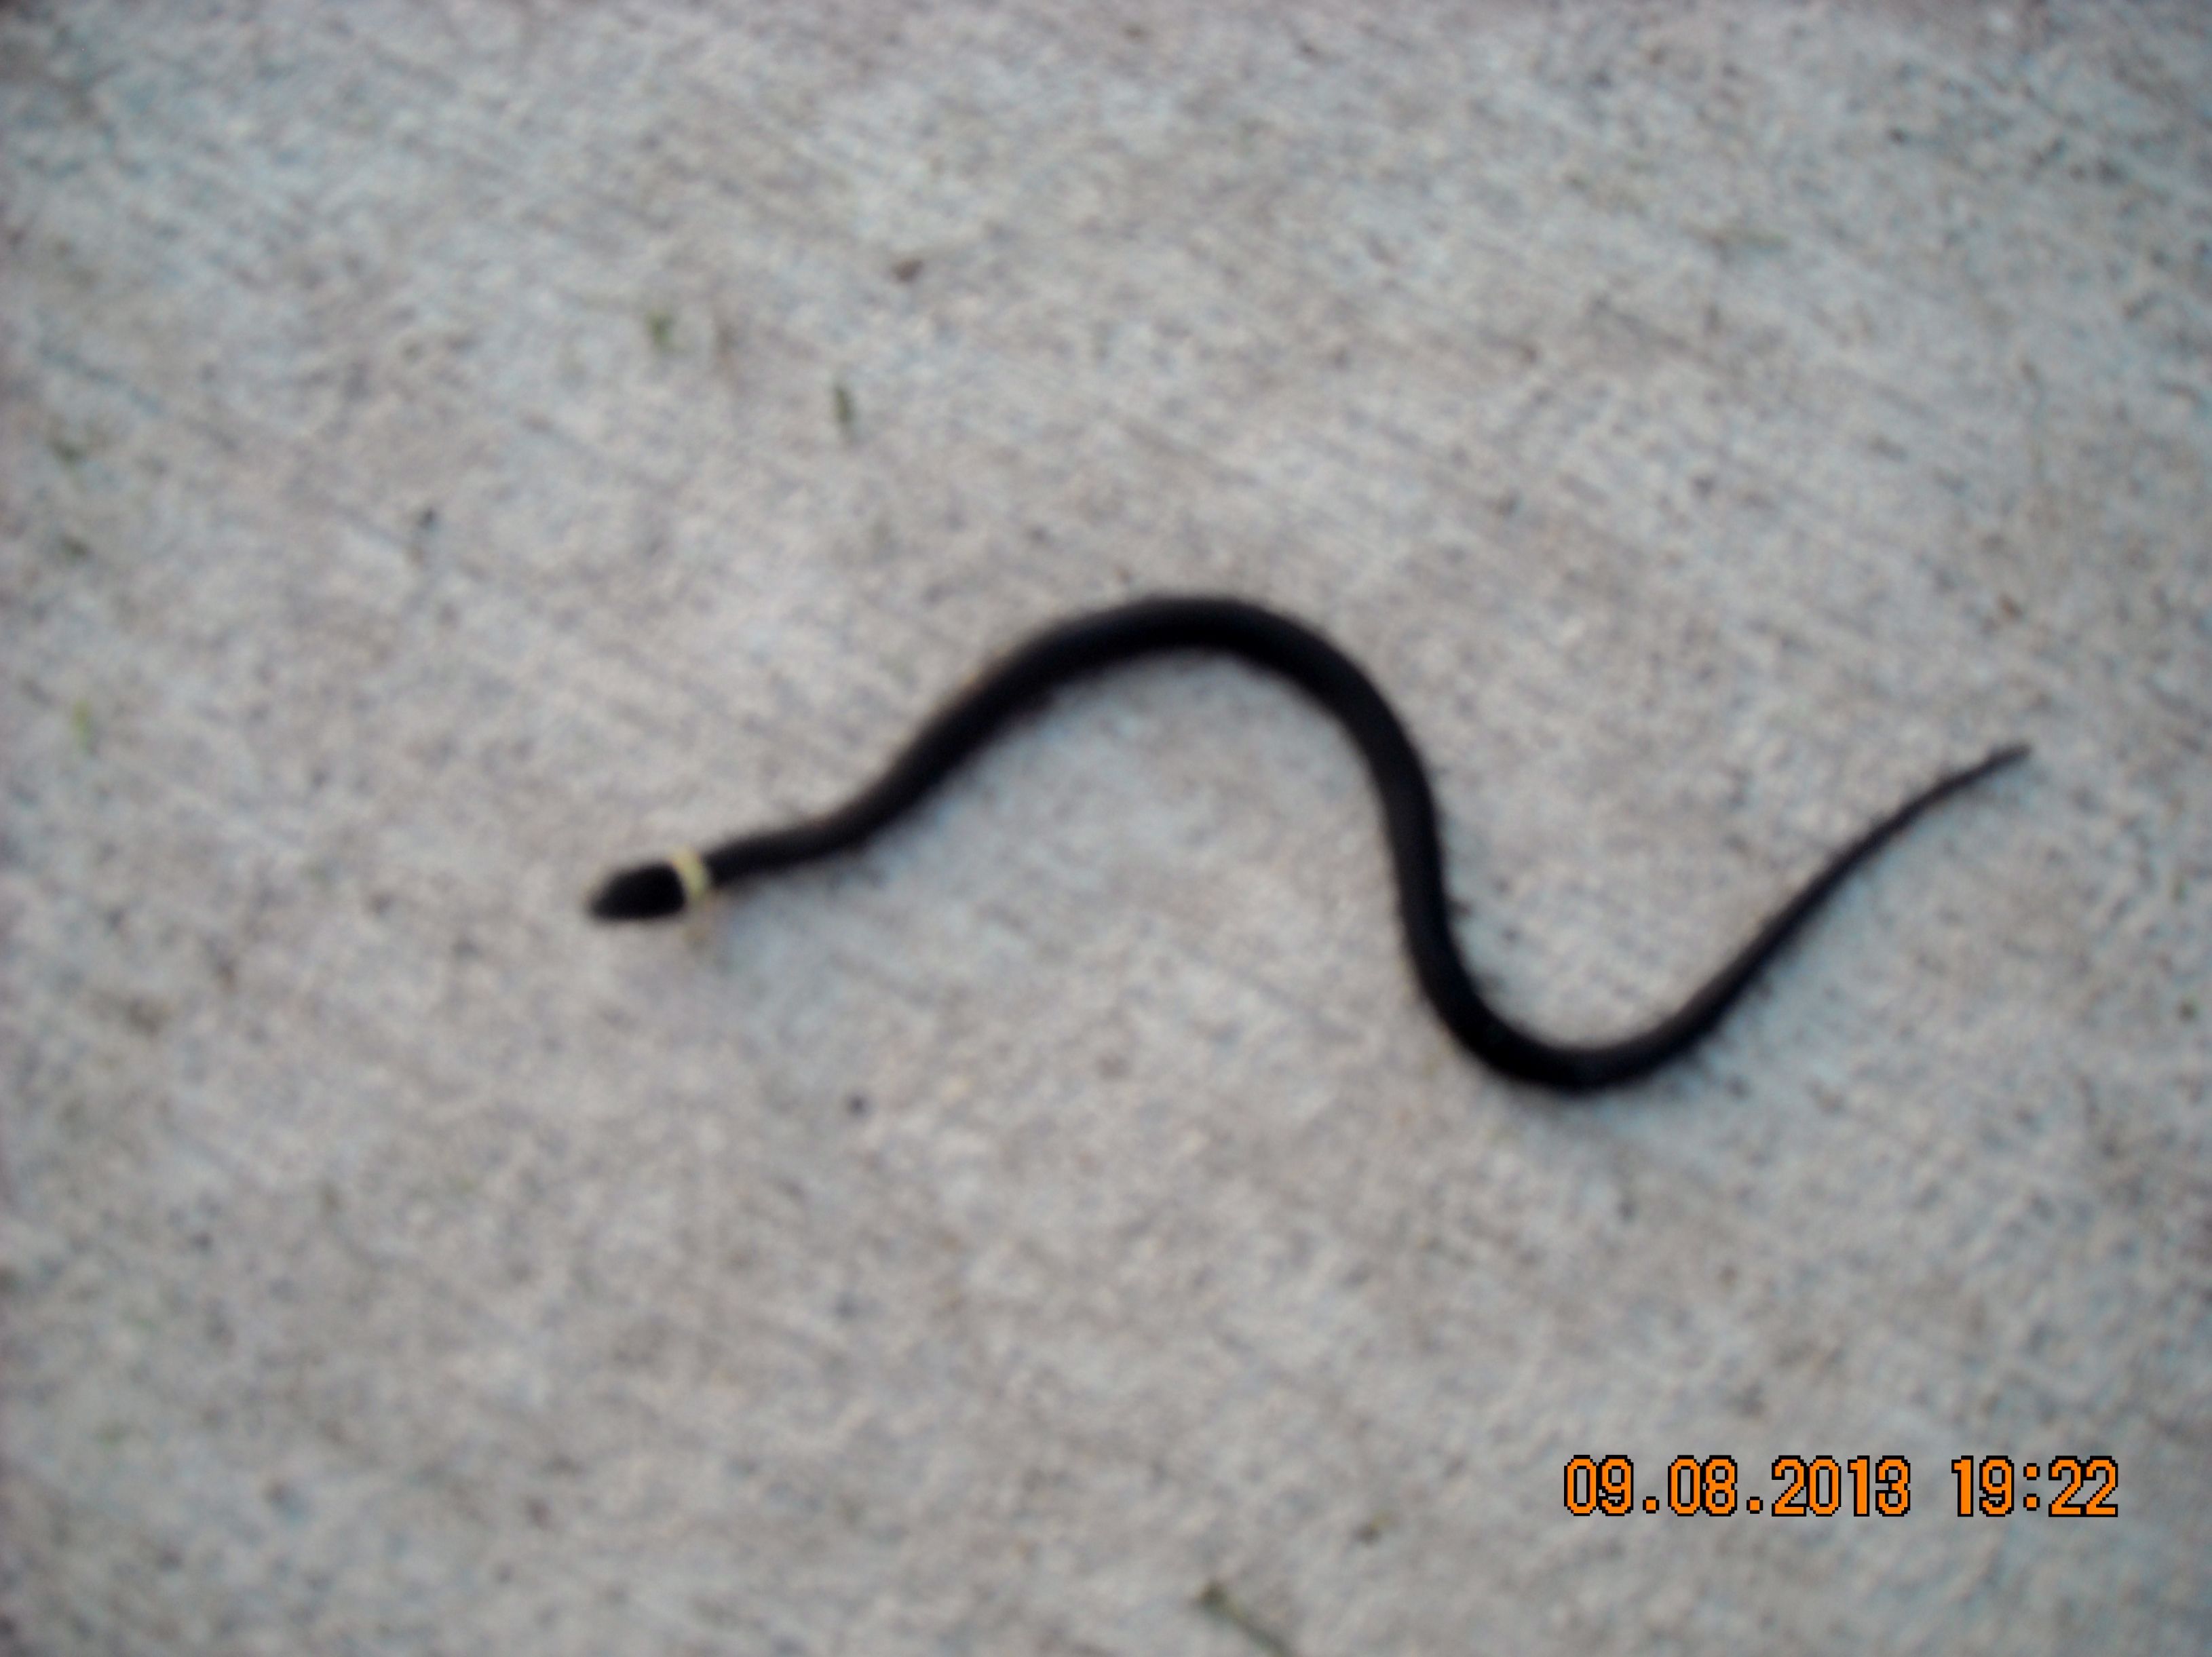 Found in my yard, baby black snake with a yellow strip around it's ...